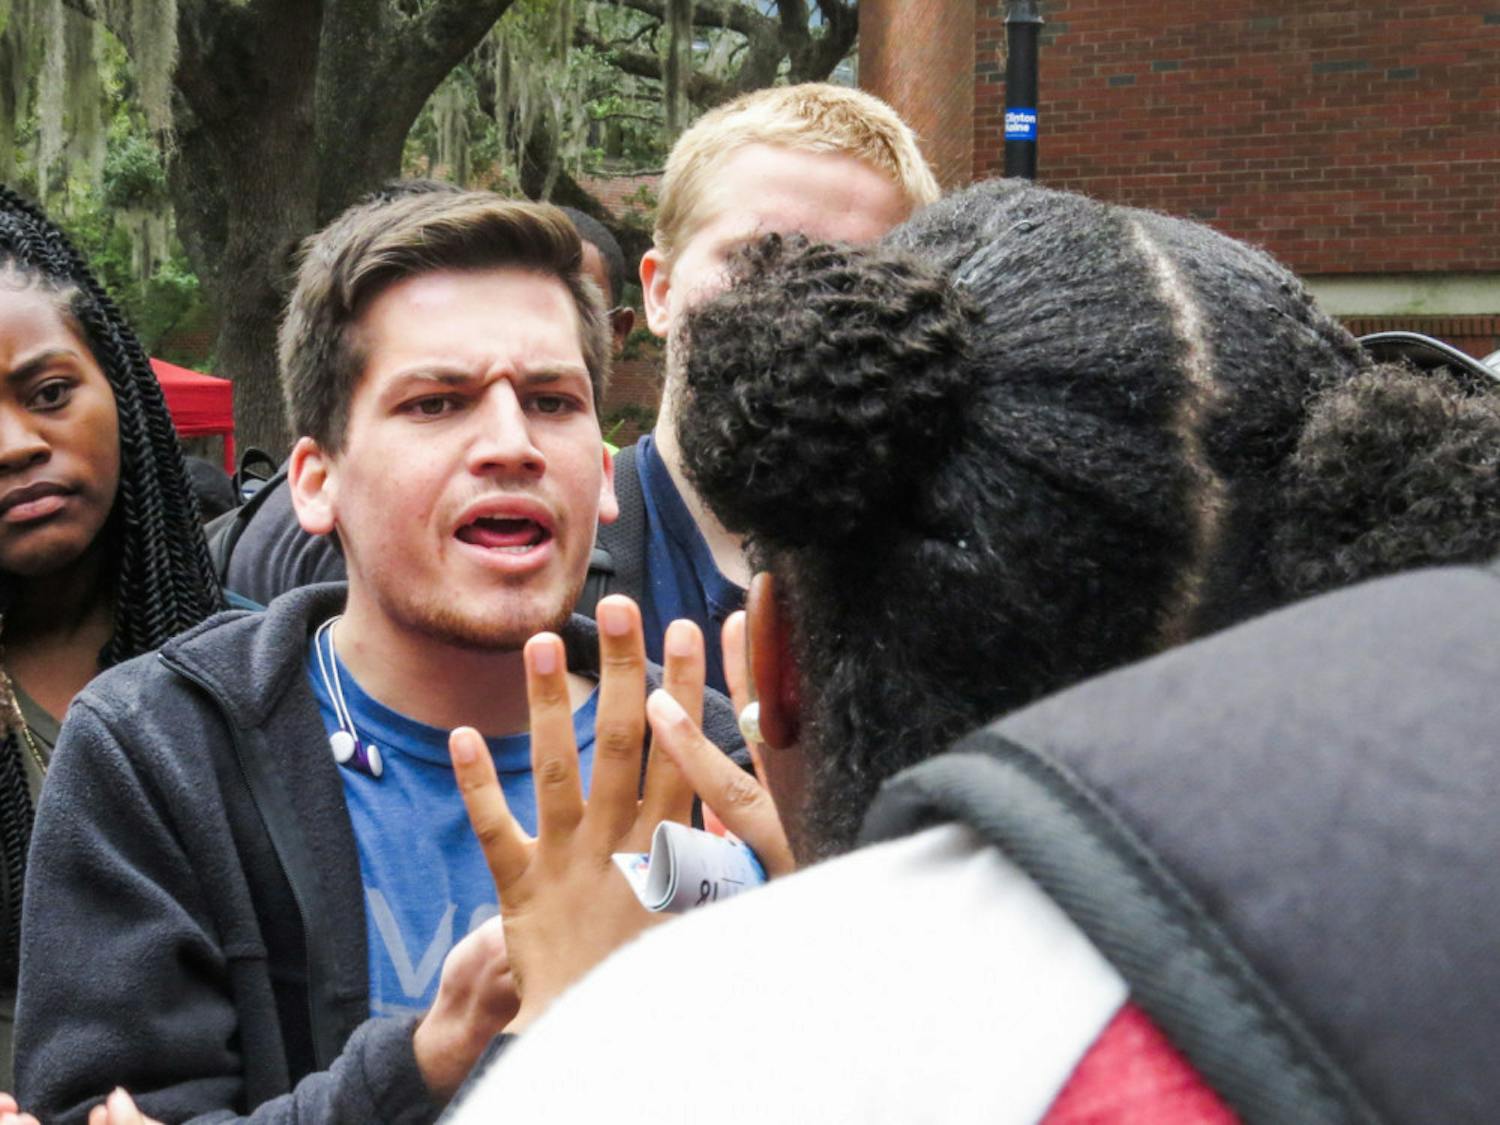 Chris Salazar, a 19-year-old UF finance freshman, argues in a tight group on Turlington Plaza during a protest against President-elect Donald Trump on Monday. "He's my president,” Salazar said after arguing. “Democracy decided. I'm going to support him." Read more on page 3.
&nbsp;